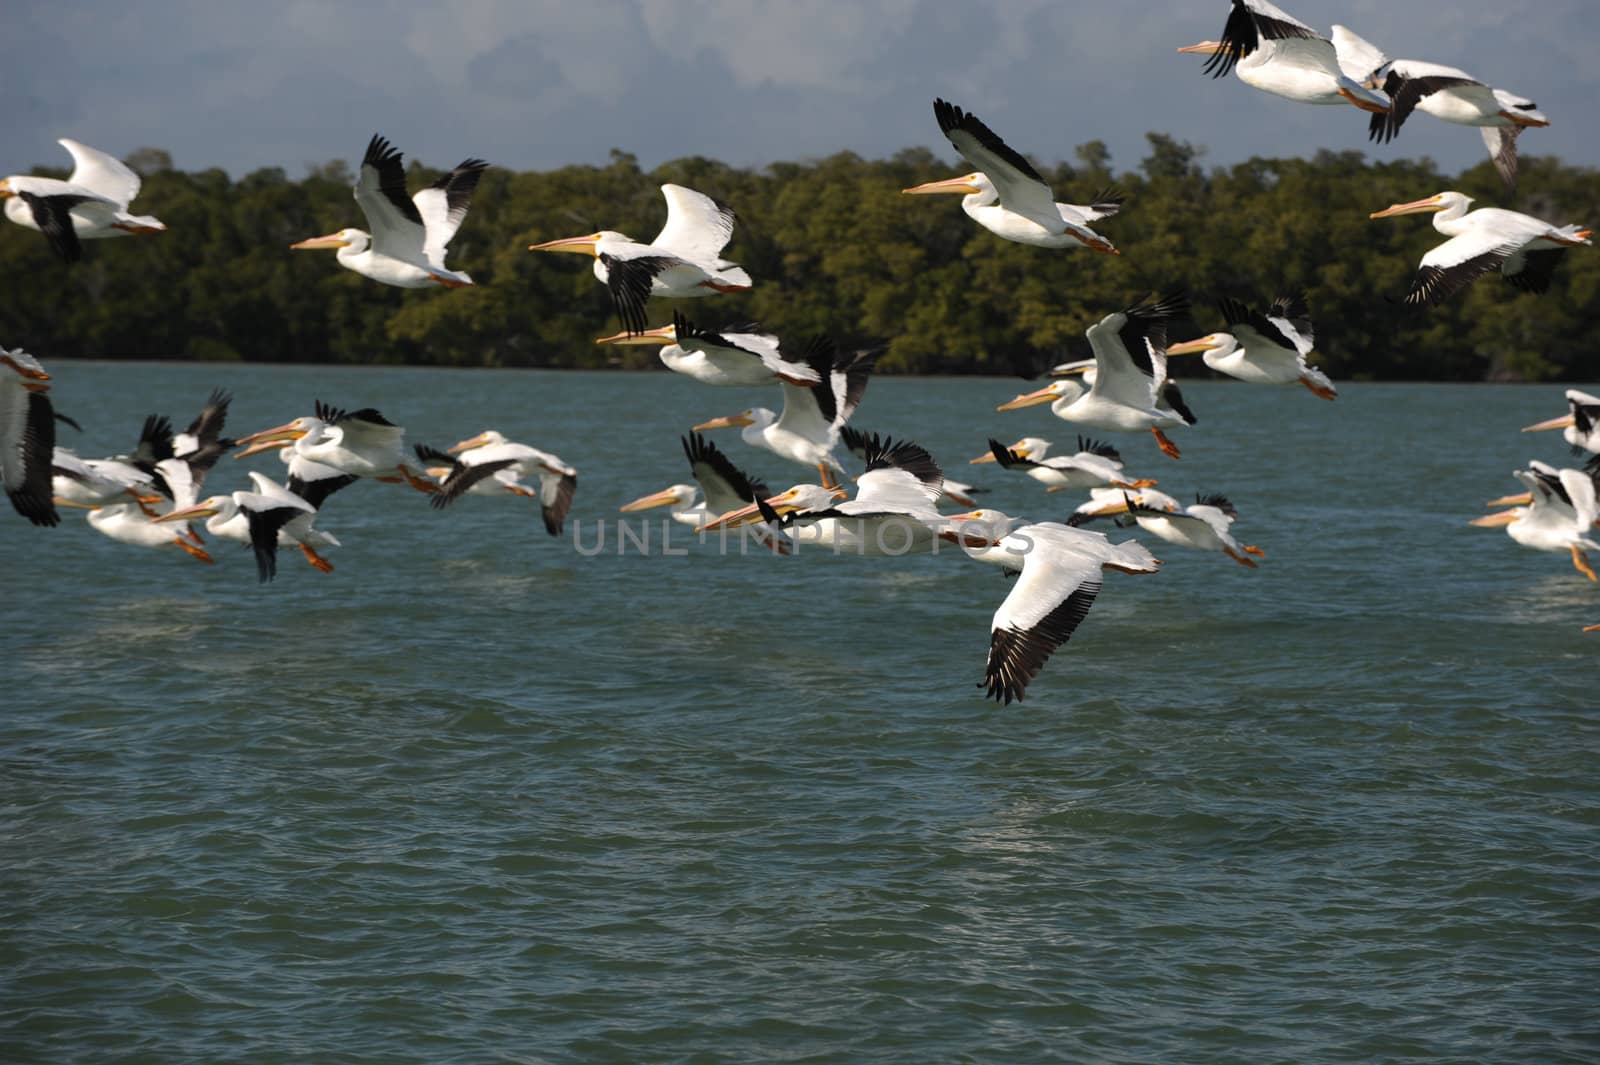 White pelicans taking flight over Gulf of Mexico